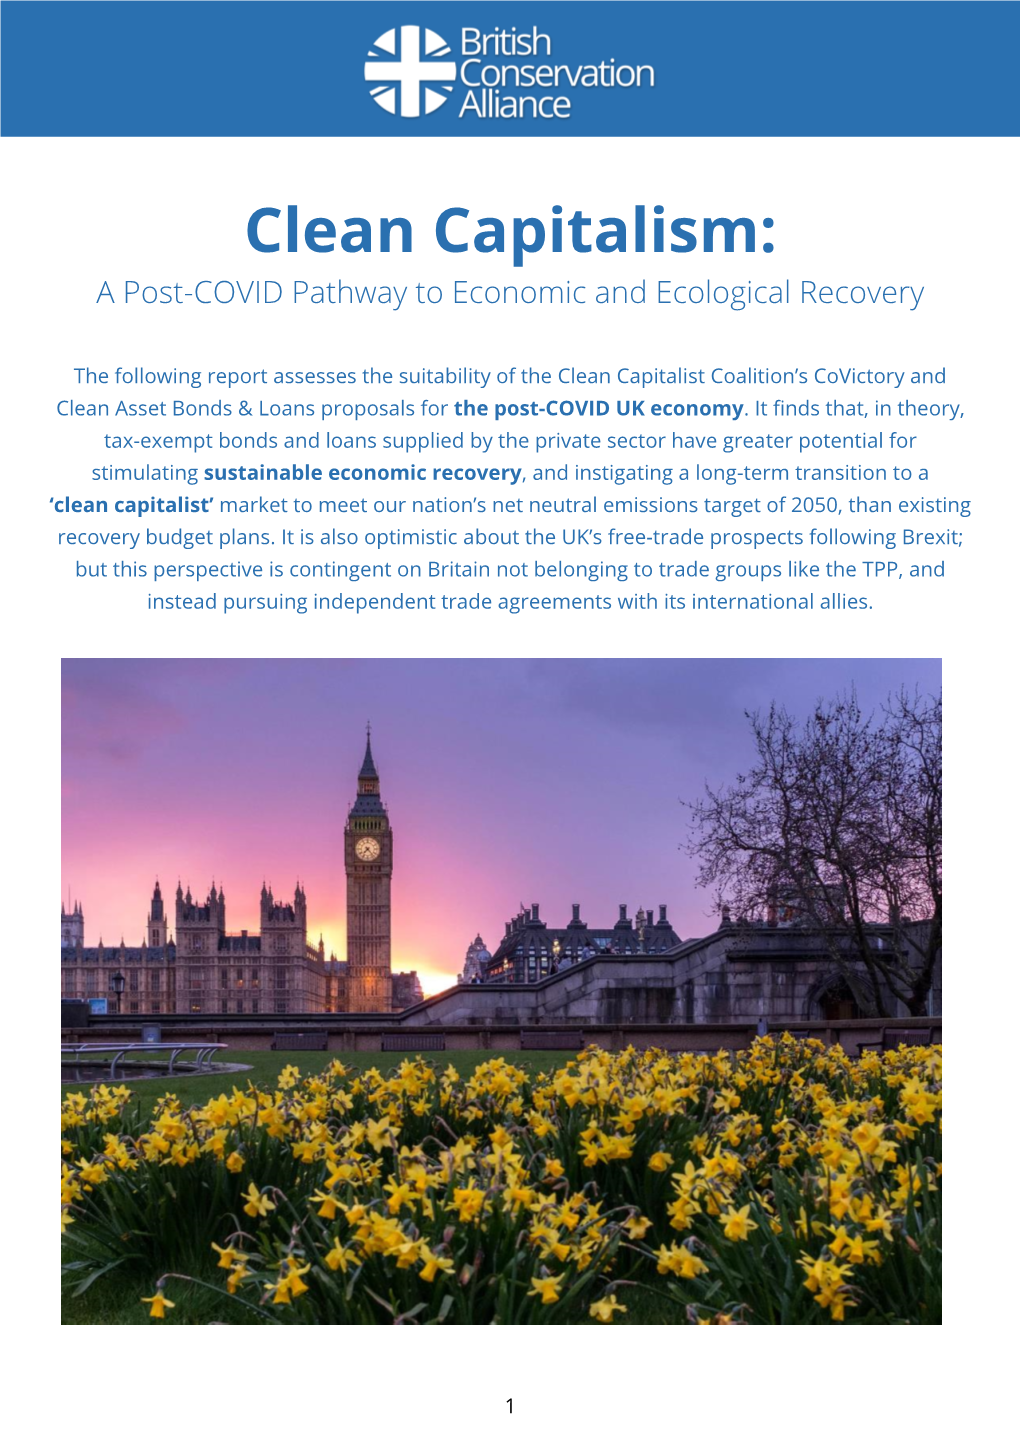 Clean Capitalism: a Post-COVID Pathway to Economic and Ecological Recovery